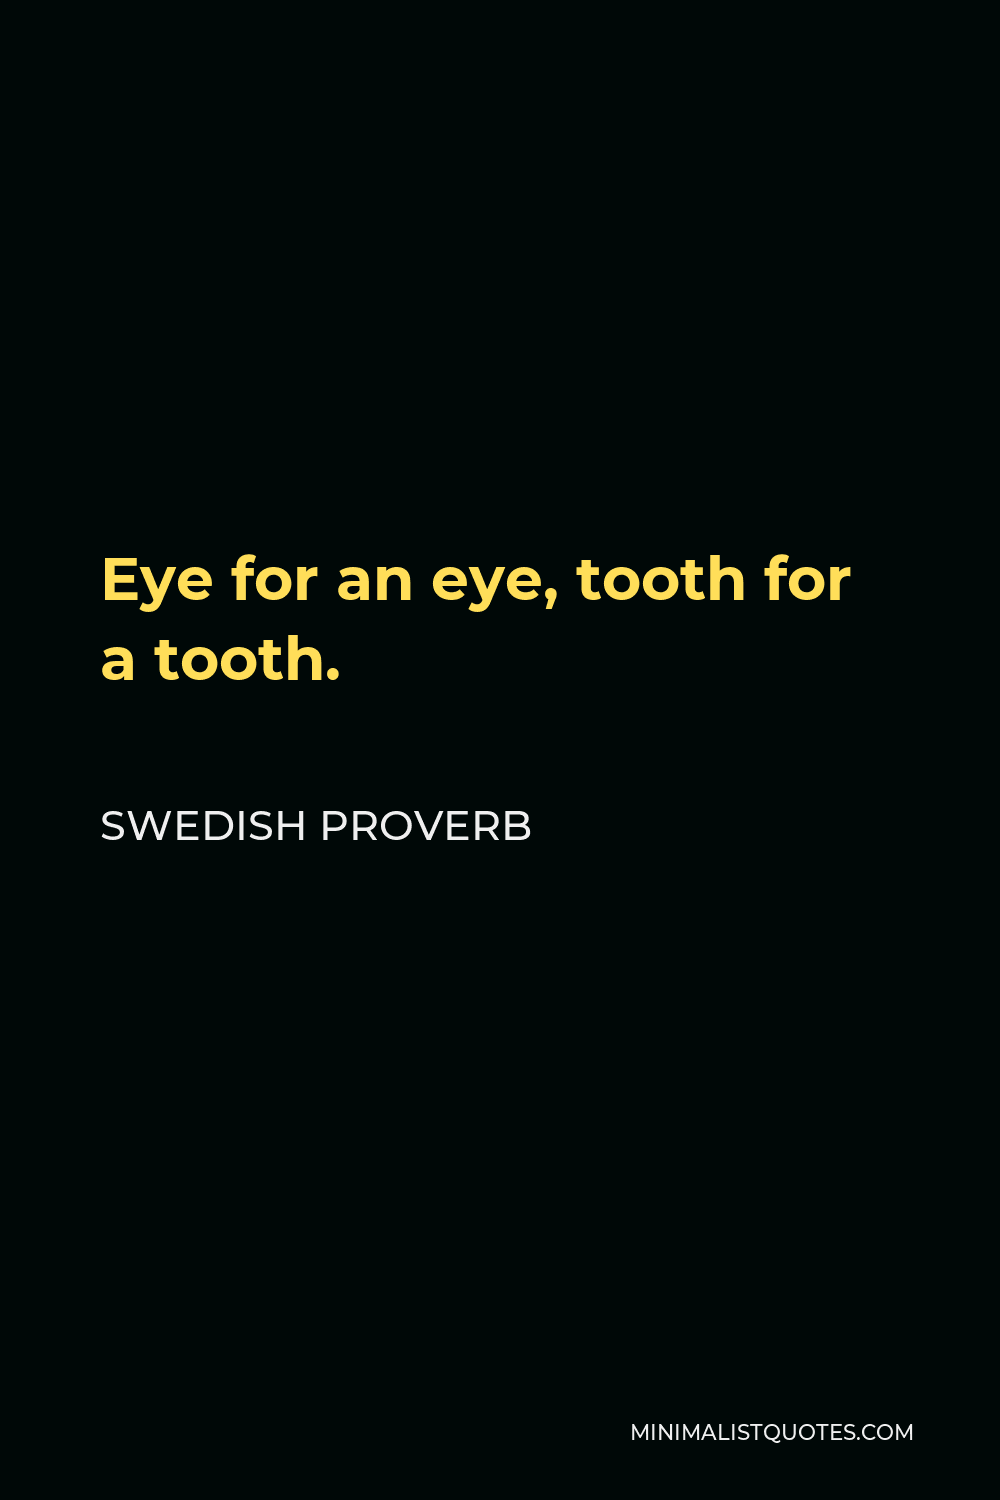 Swedish Proverb Quote - Eye for an eye, tooth for a tooth.